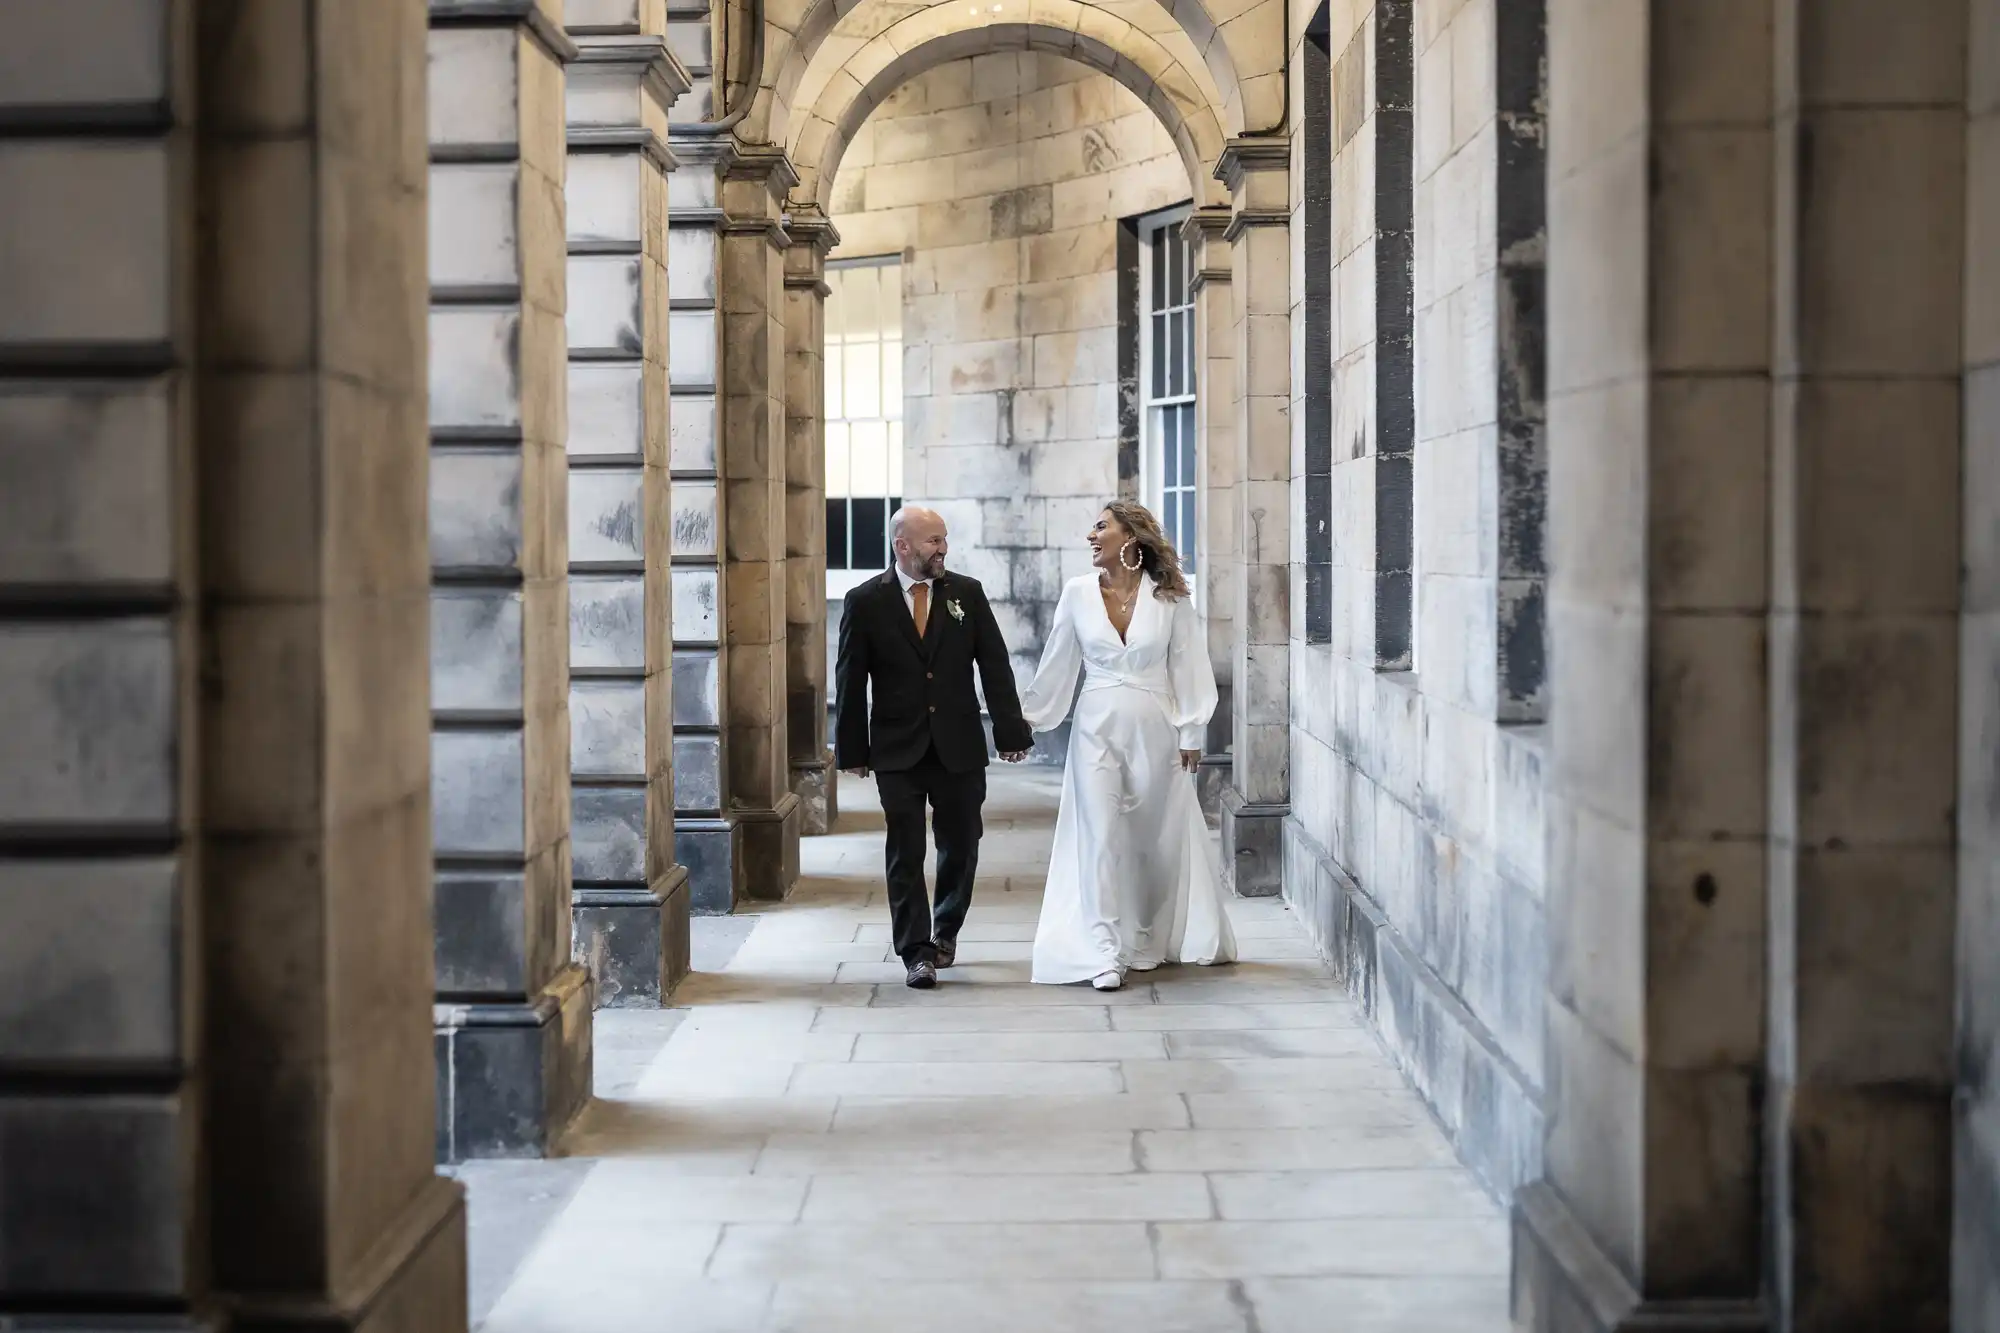 A couple, dressed in wedding attire, walks through a stone archway holding hands. The bride wears a white dress, and the groom wears a dark suit.